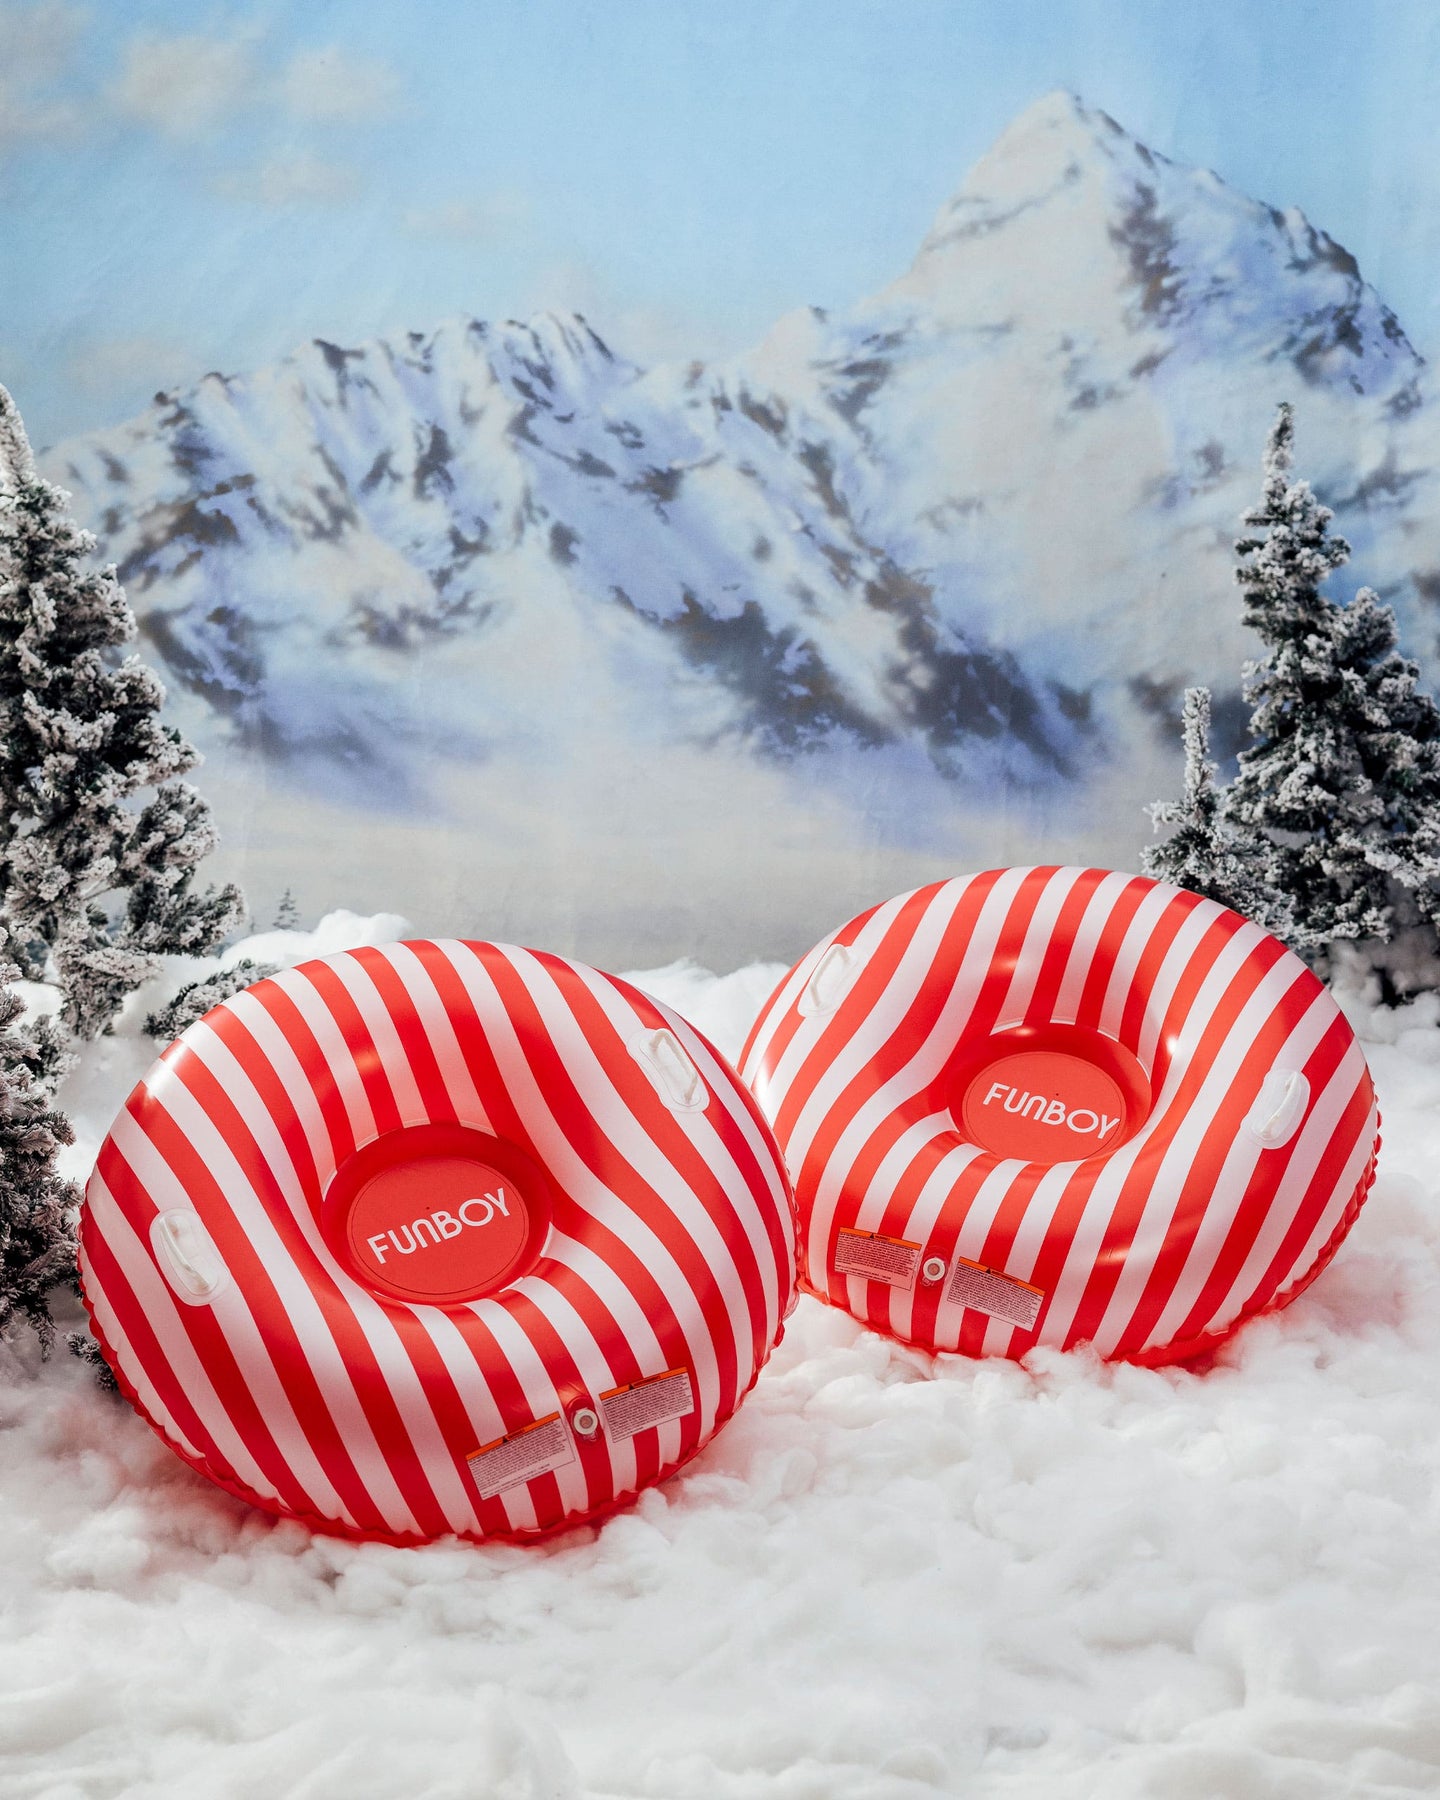 Winter Snow Tube Sled - Candy Cane Striped